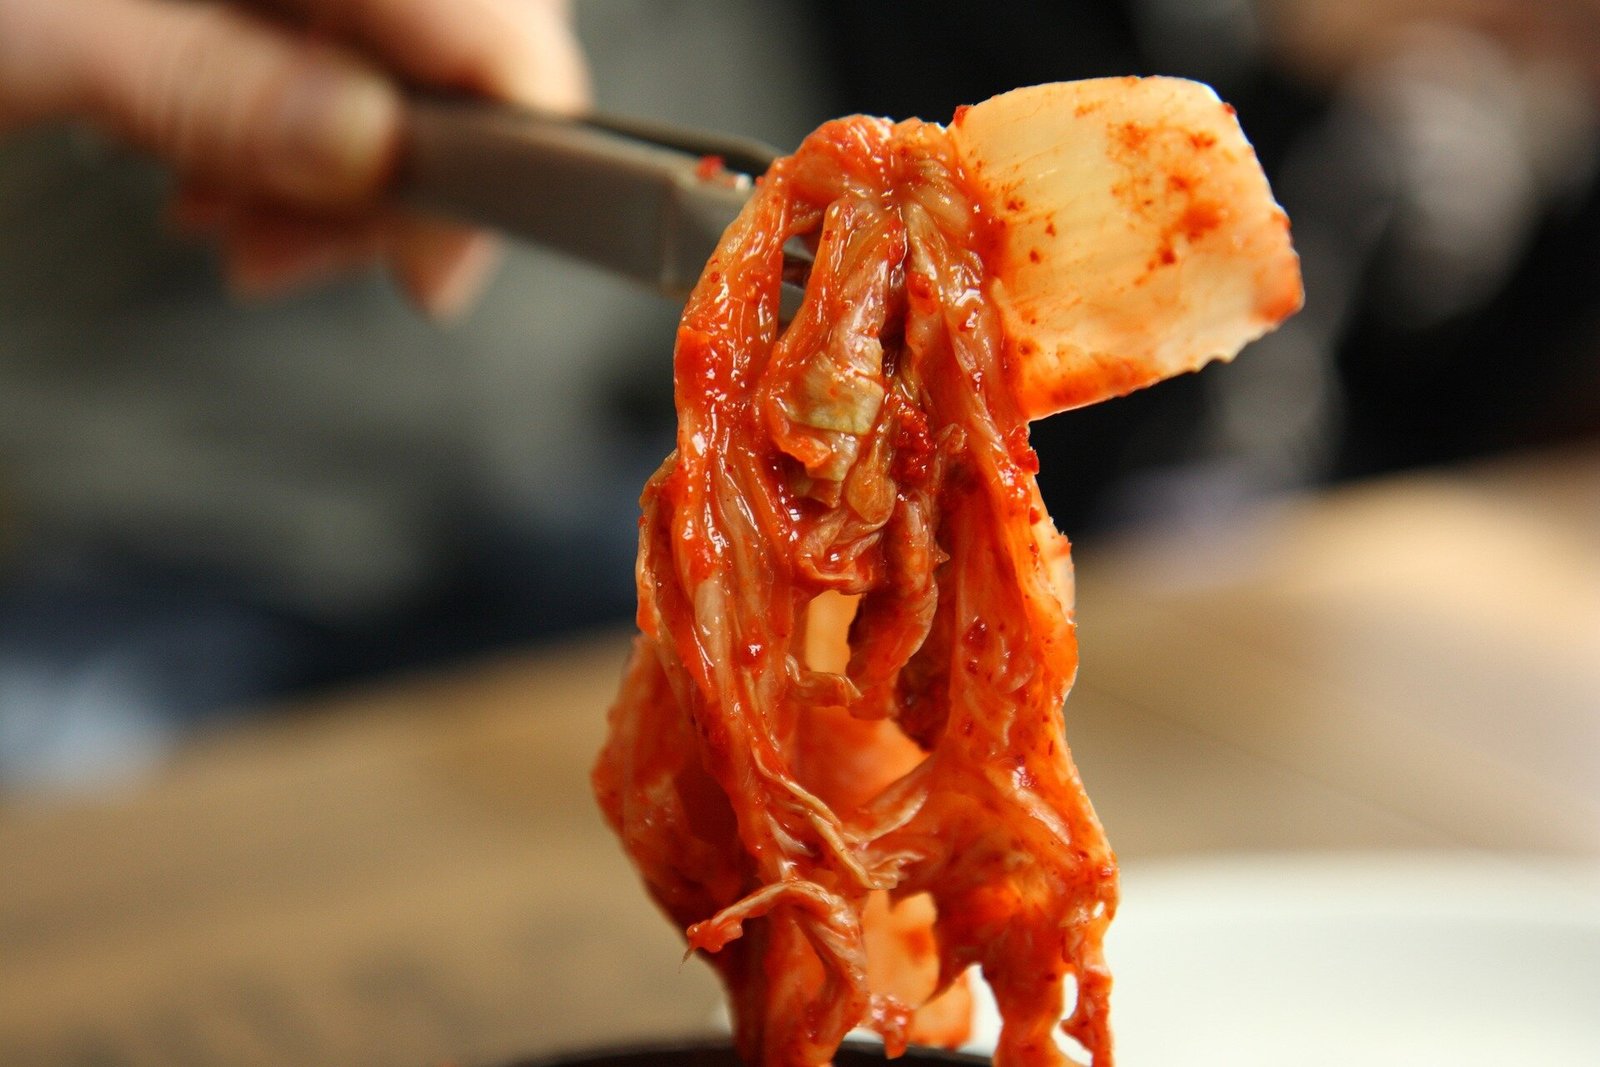 Up to three daily servings of kimchi may lower mens obesity risk